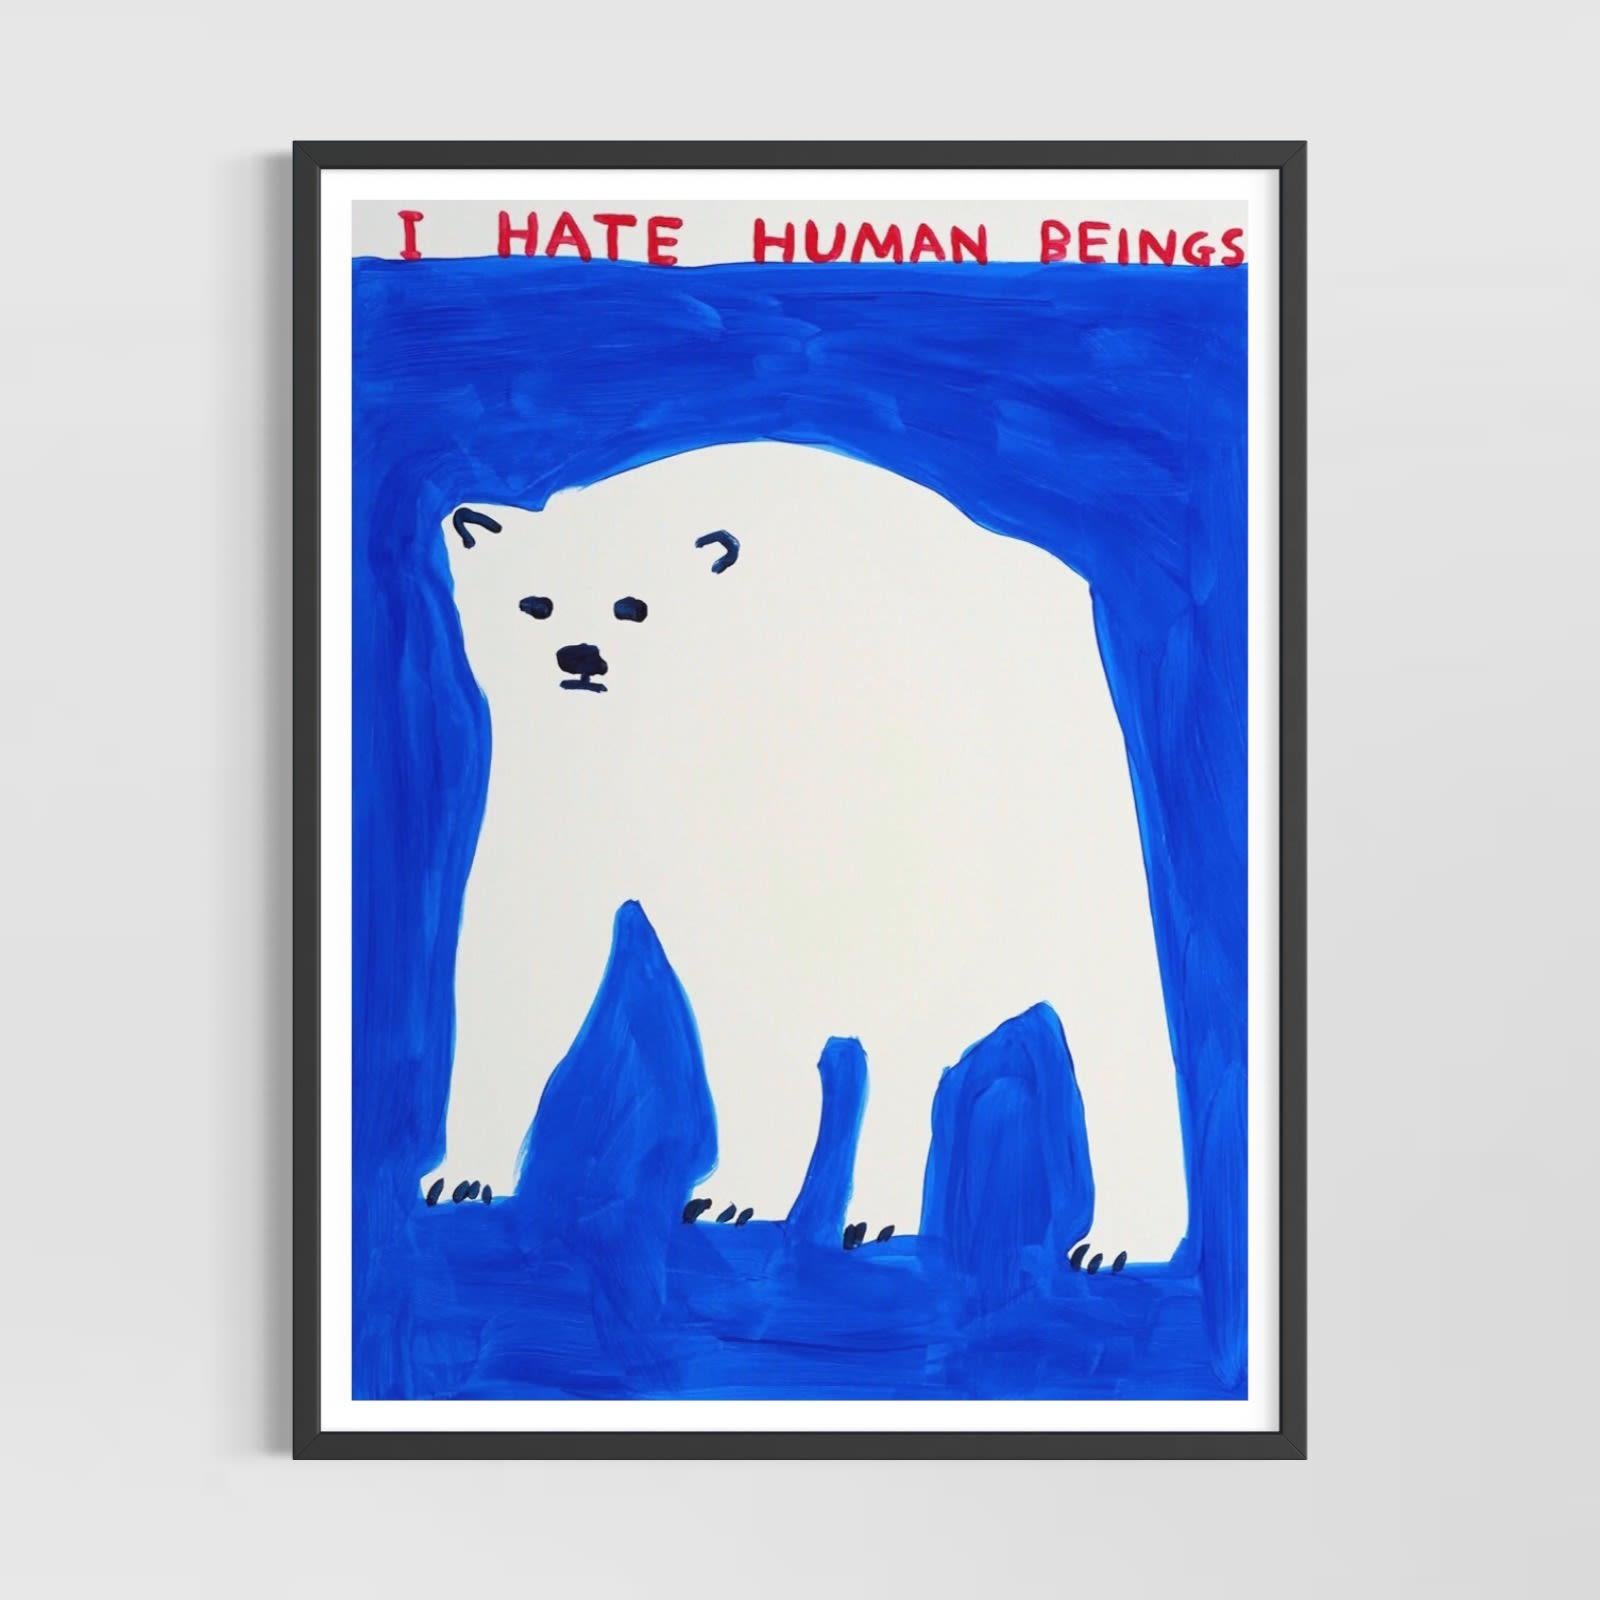 I Hate Humans -Contemporary, 21st Century, Limited Edition - Print by David Shrigley